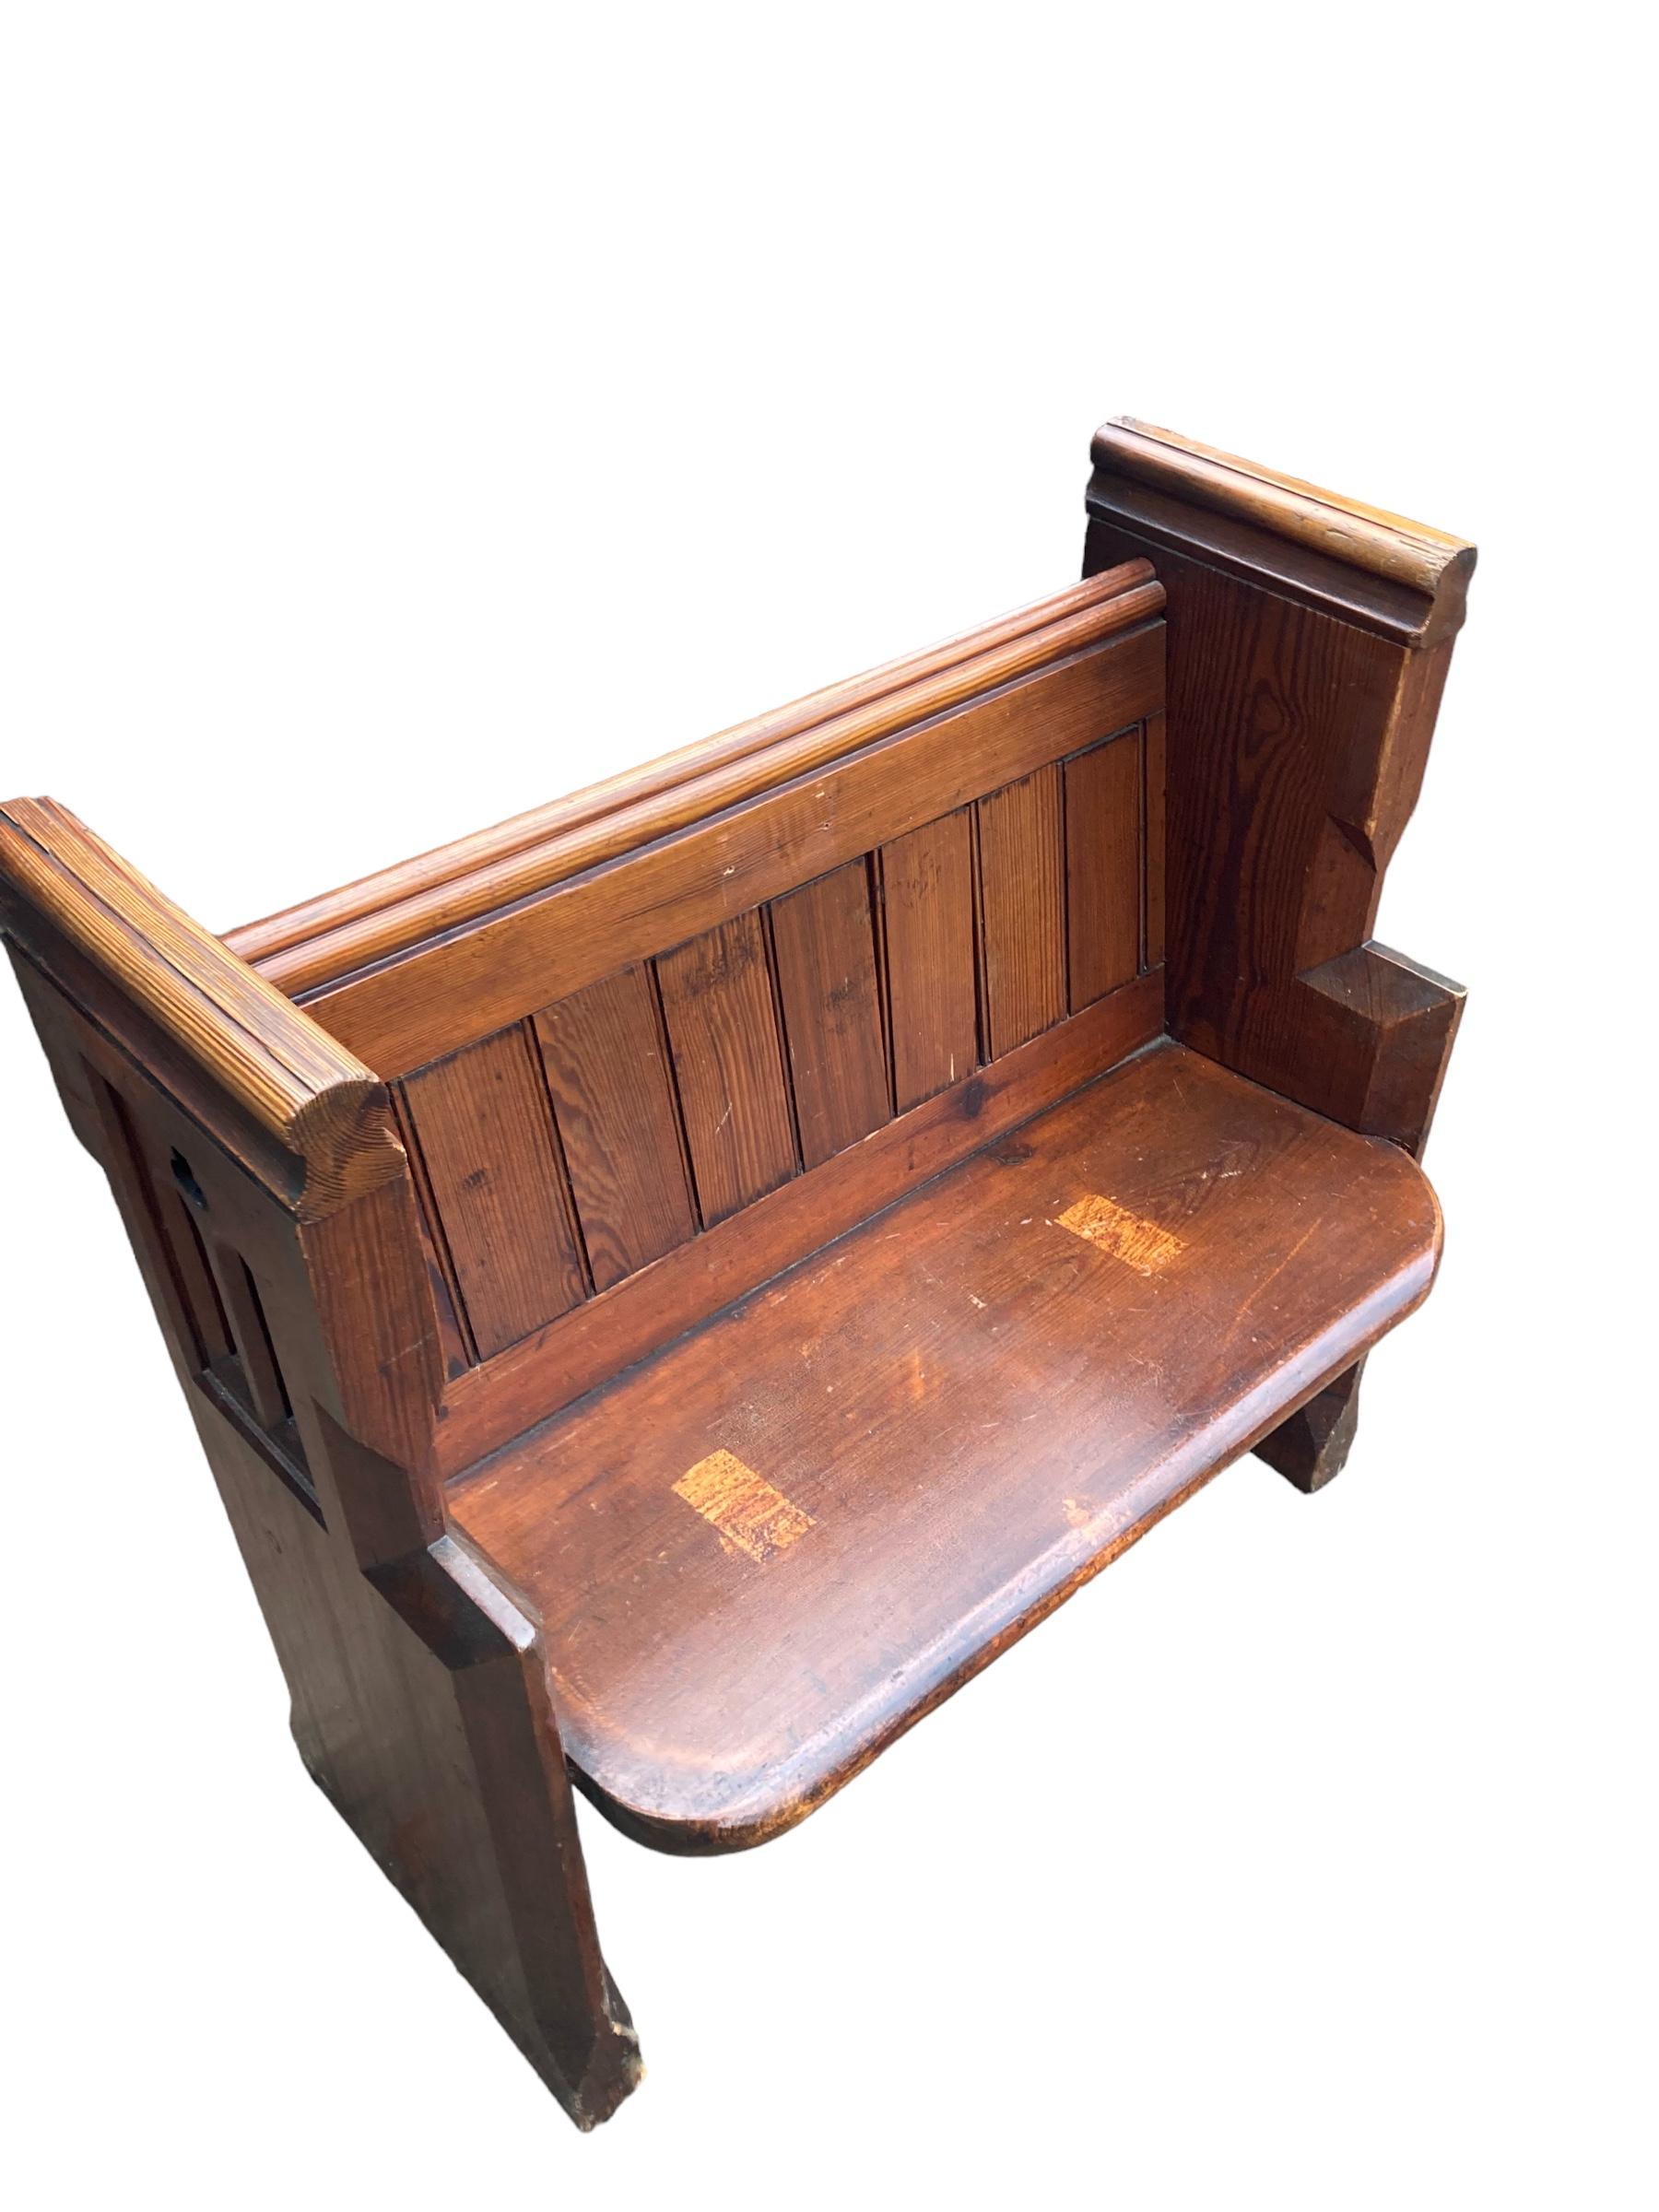 British Antique Oak Gothic style Church pew in Original Conditionwith numbers 44 on side